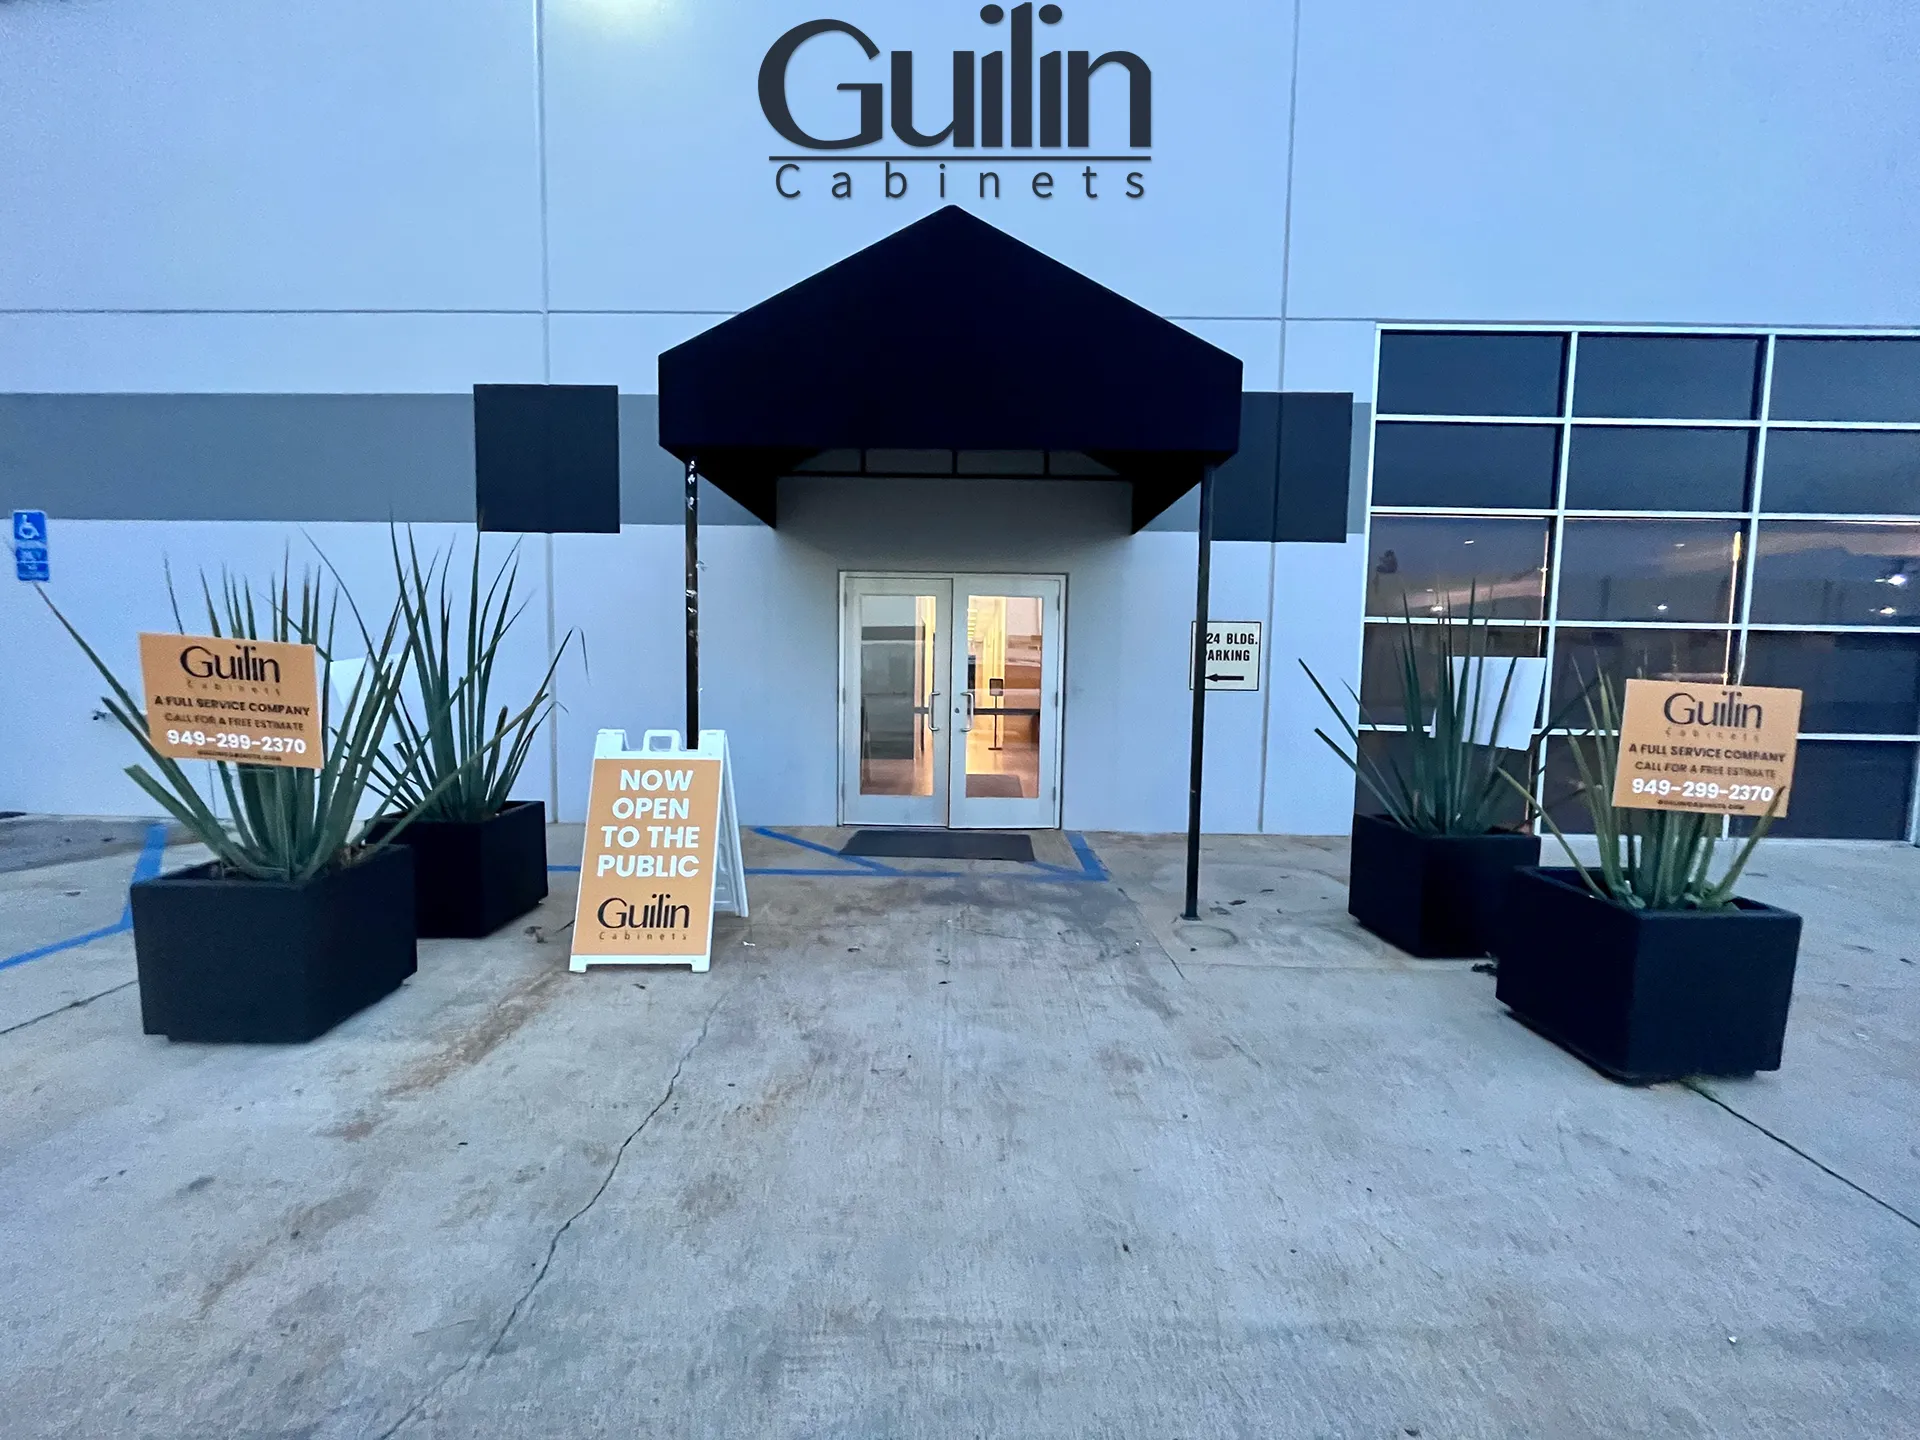 Guilin Cabinets is a remodeling contractor in Irvine, California offering services including bathroom, kitchen, and custom home building.